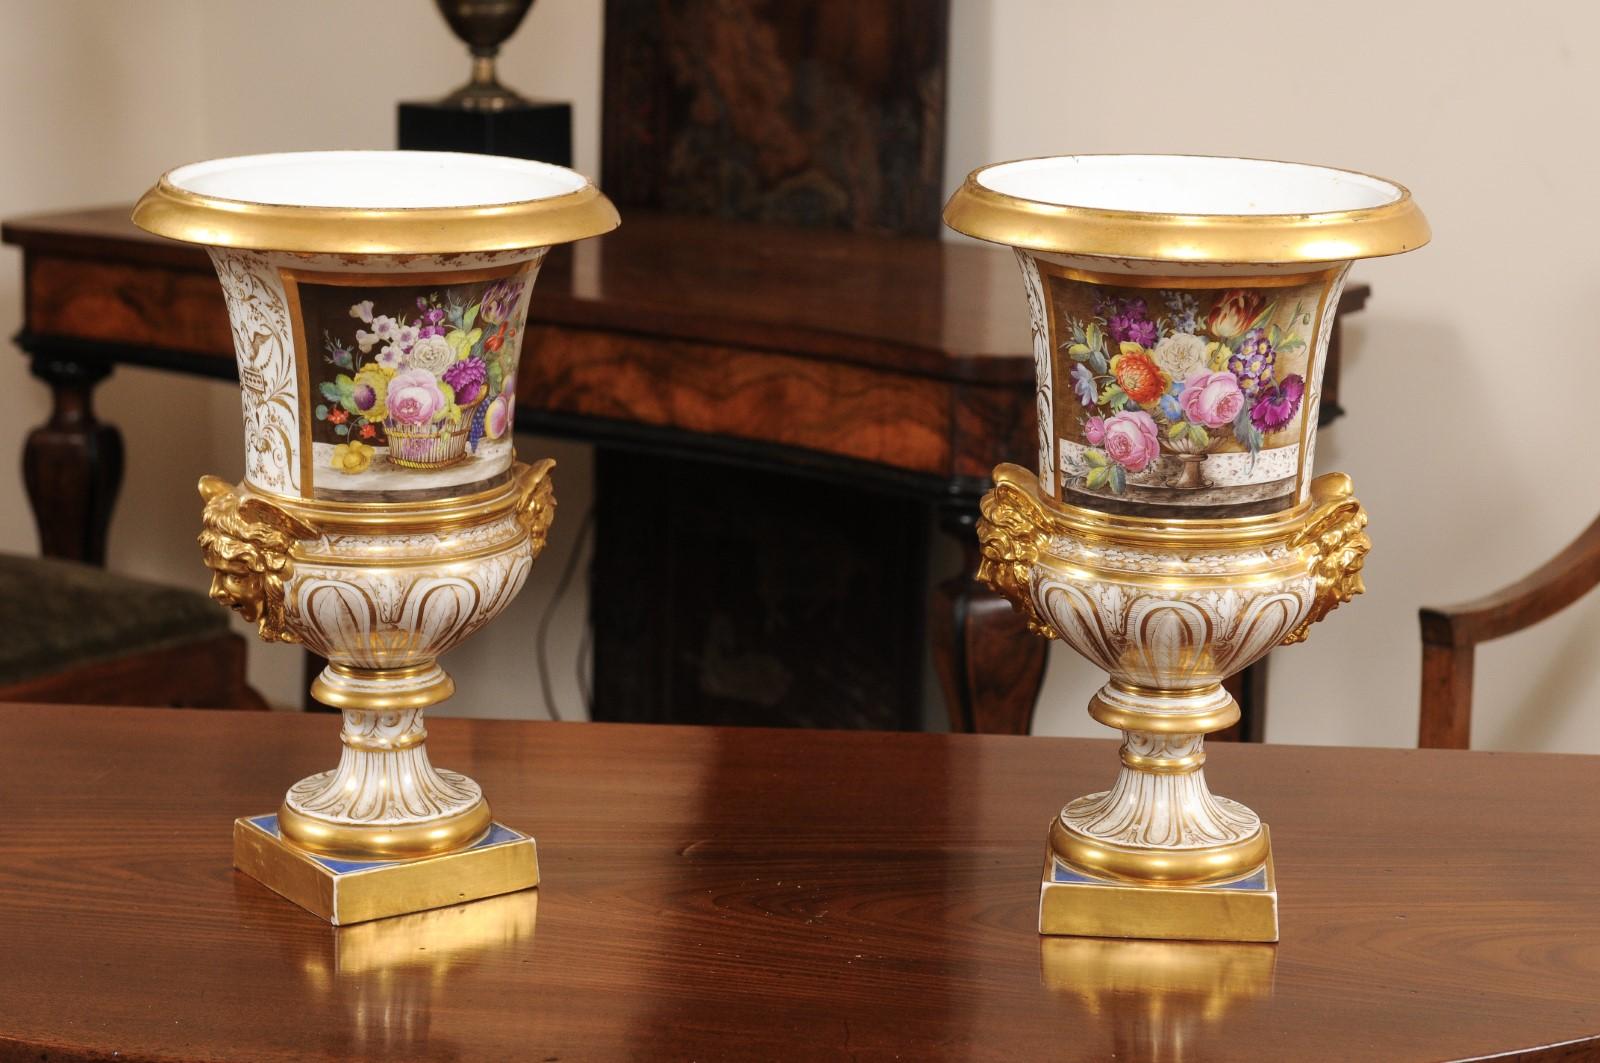 Pair of 19th Century English Derby Urns with flowers.